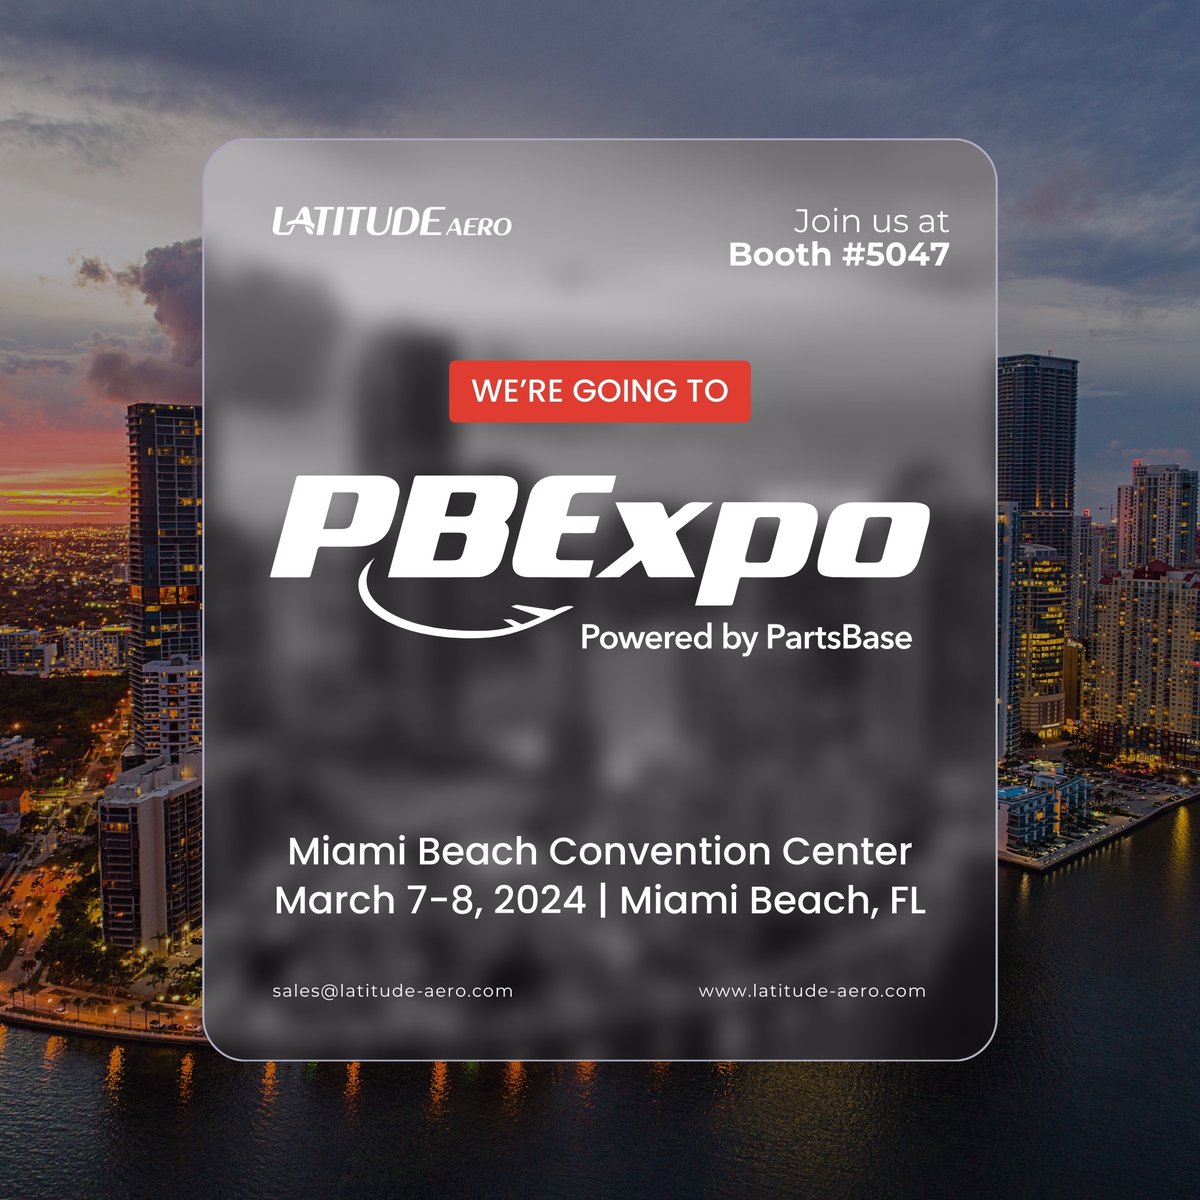 Countdown is on! Just a few more weeks until we're back at @PBExpo! ✈️ Join us March 7-8 at the Miami Beach Convention Center. Don't forget to get in touch with our sales team at sales@latitude-aero.com, or stop by booth #5047 to say hello. See you soon, Miami! ☀️ #PBExpo…